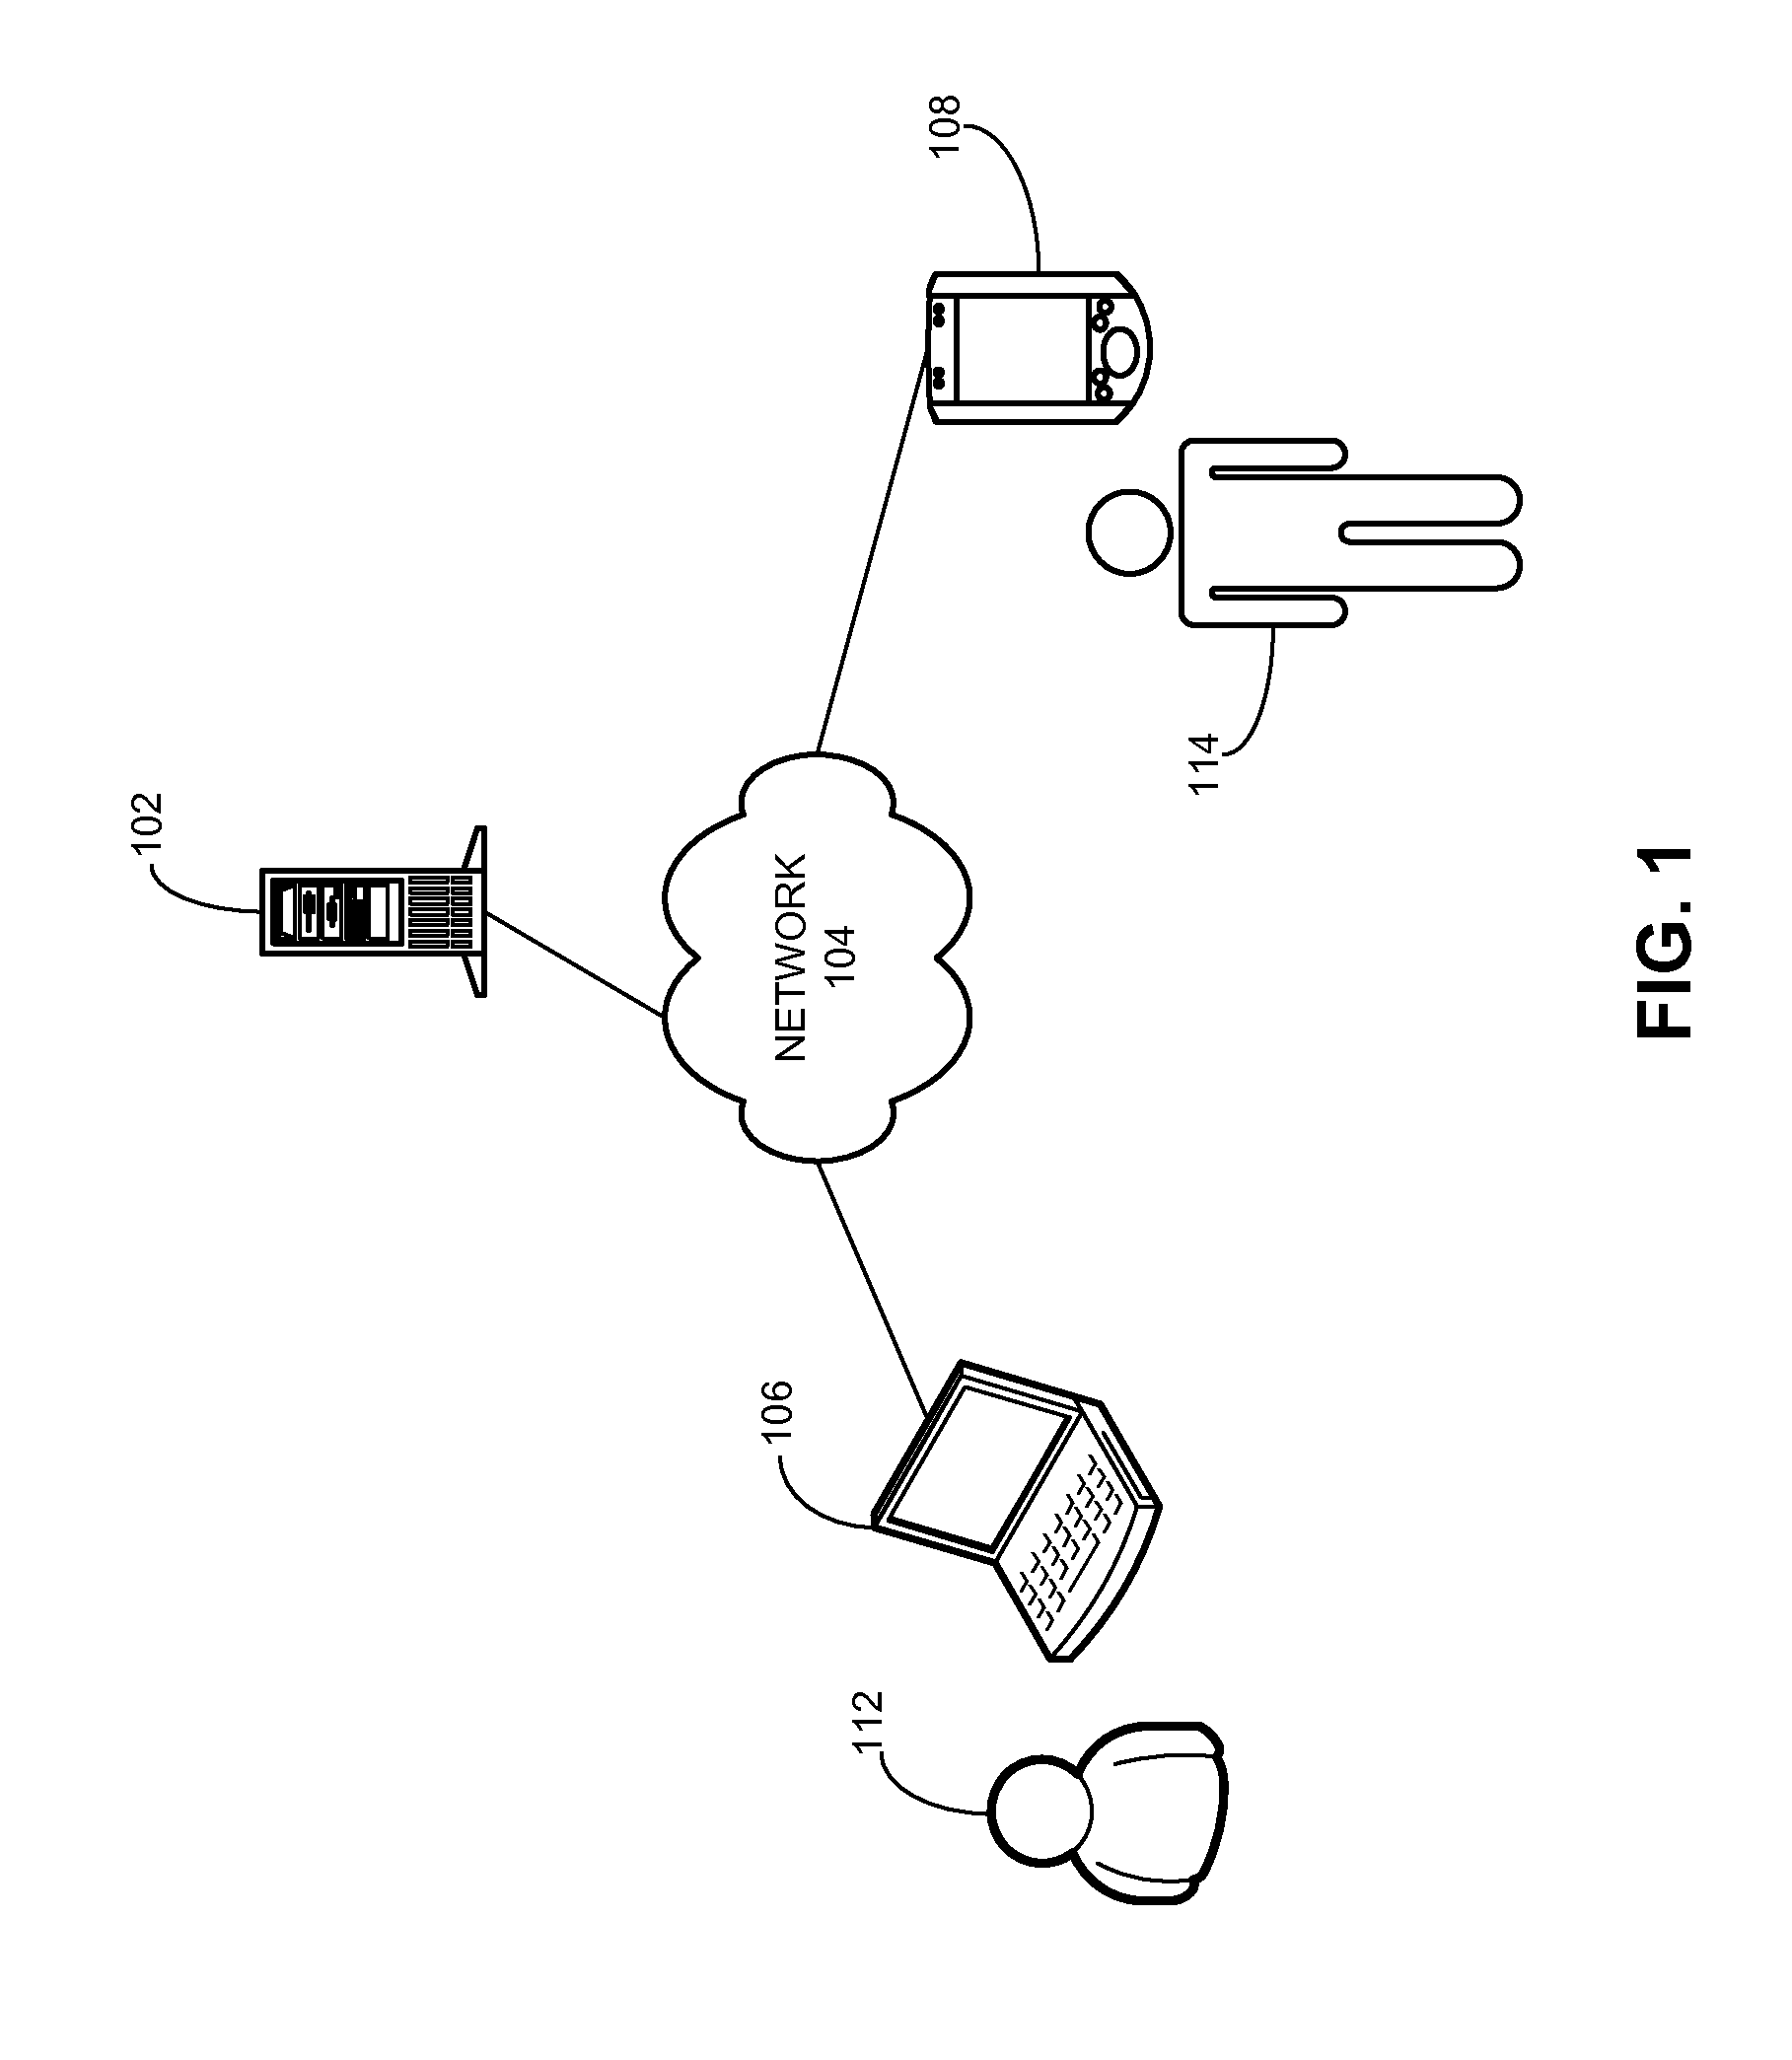 Method and system for providing a transaction platform for pre-owned merchandise